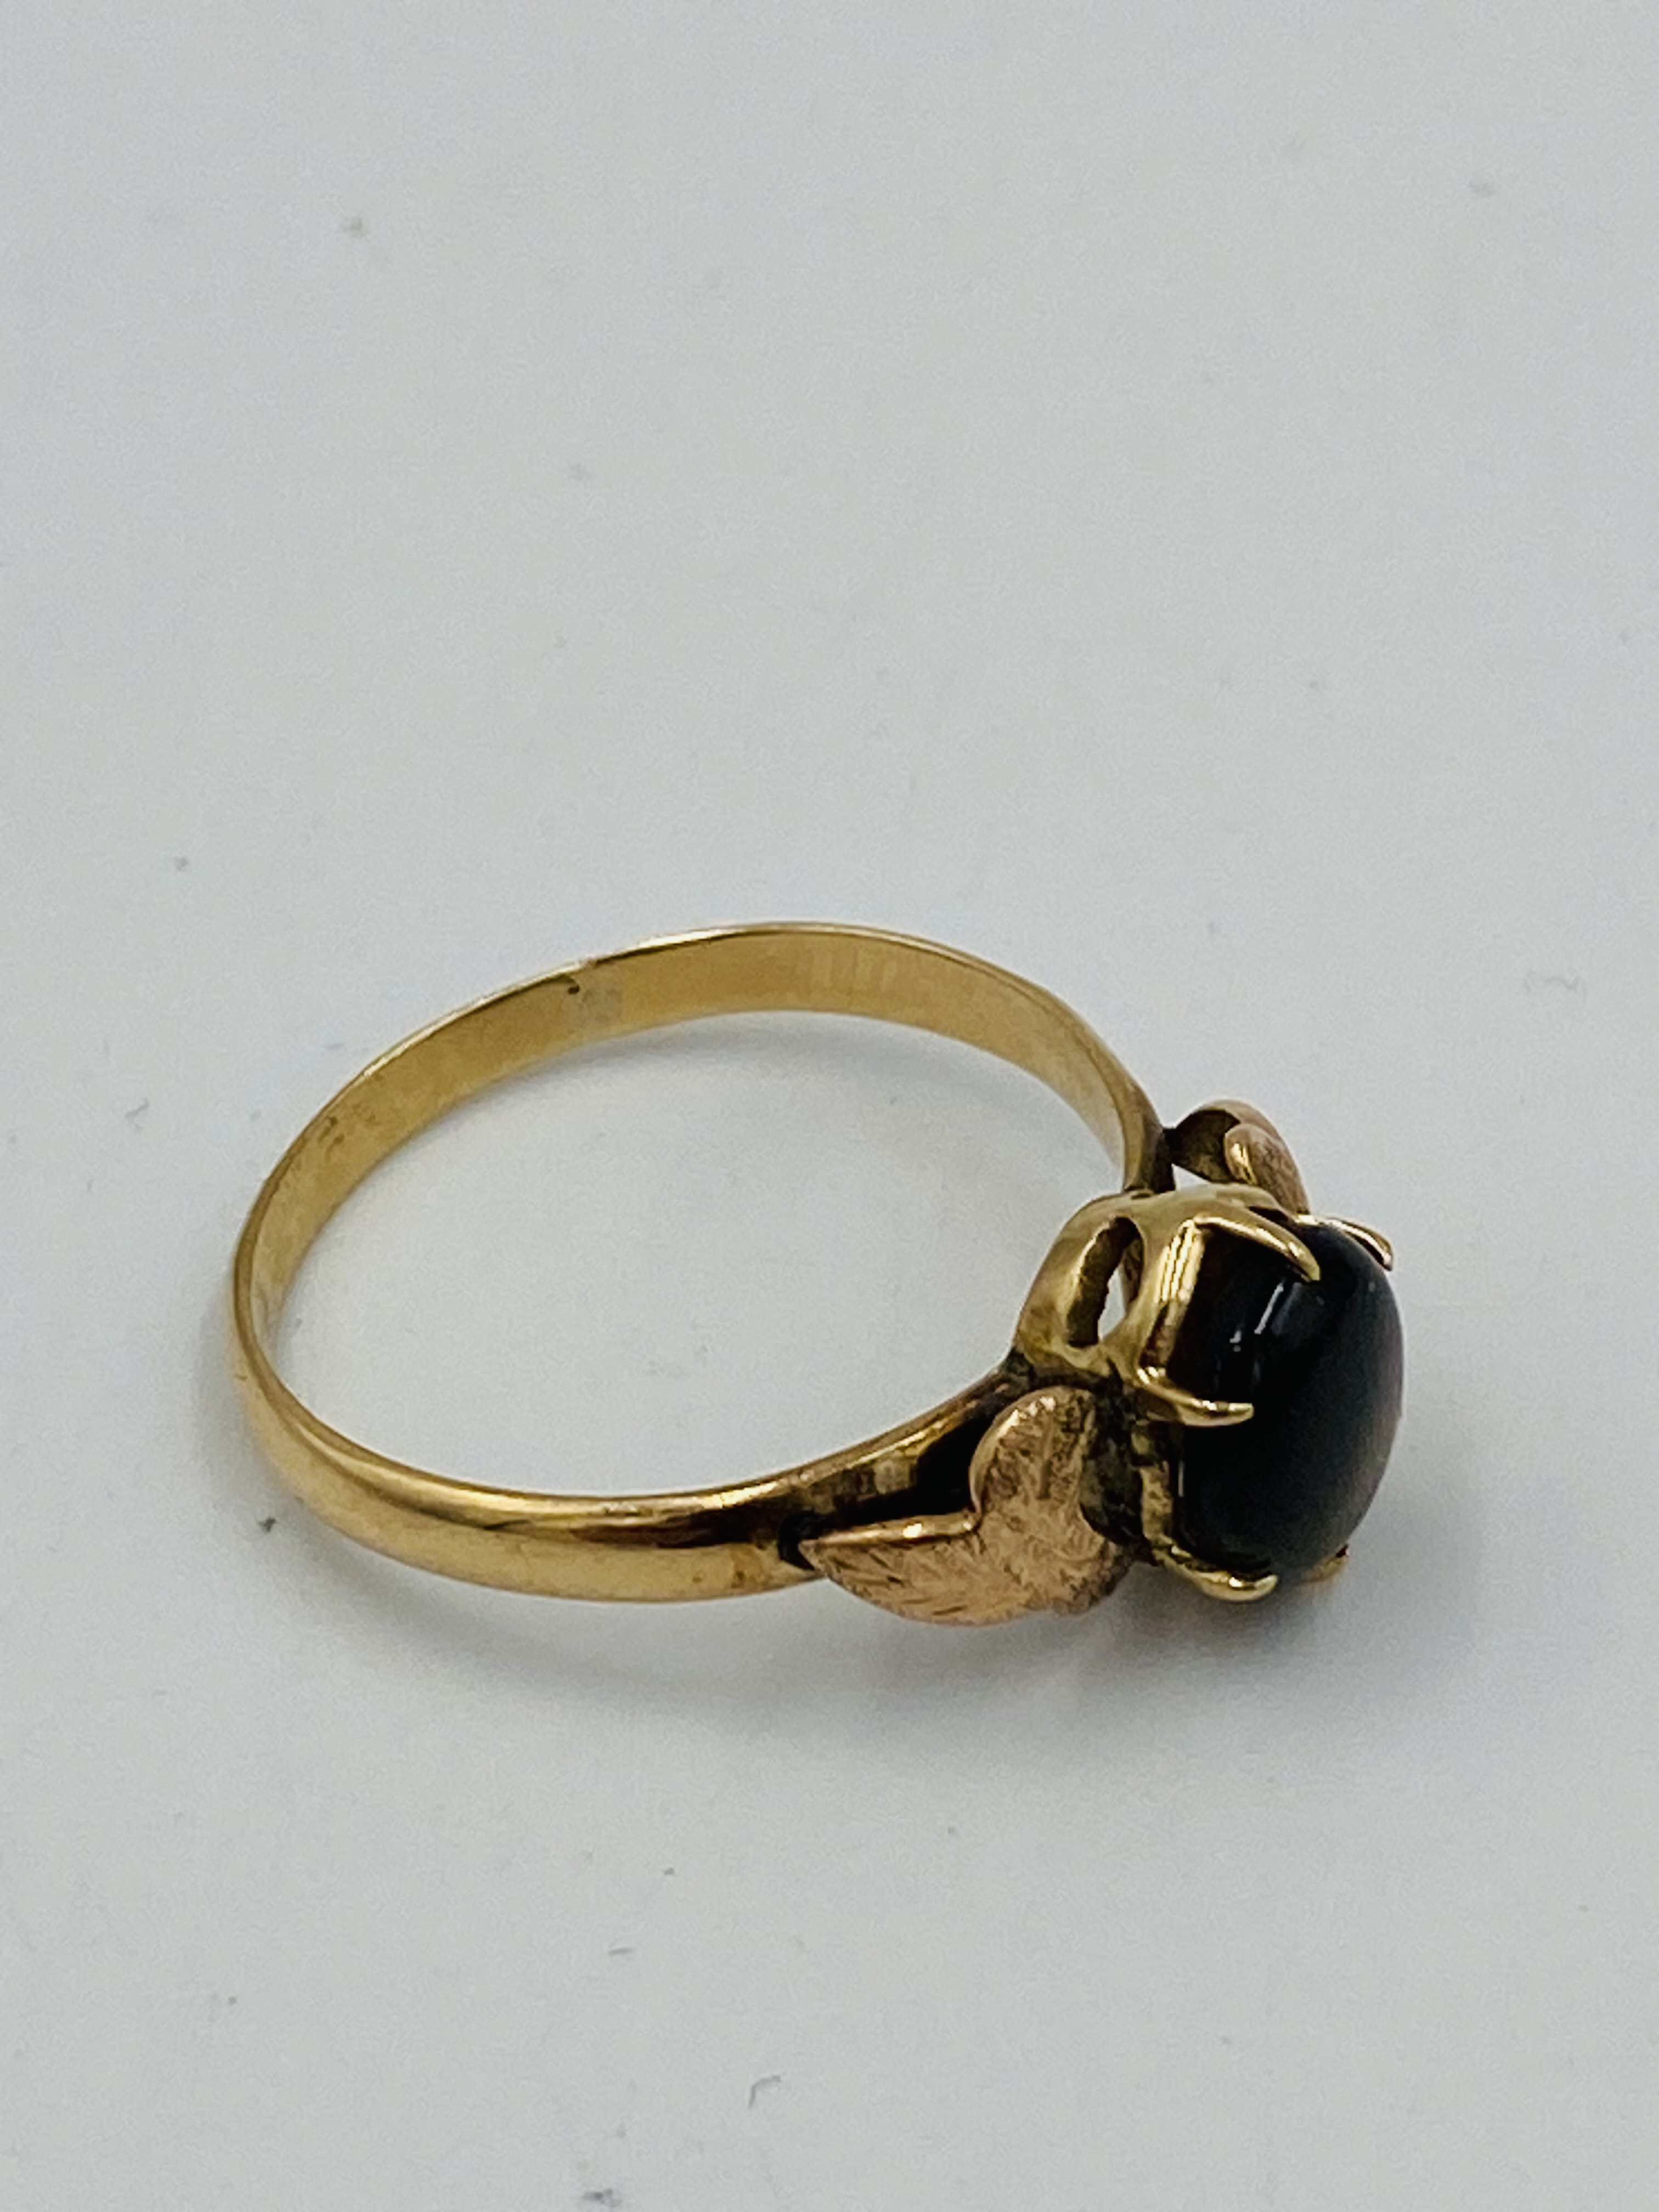 9ct gold ring set with a sapphire cabochon - Image 5 of 9